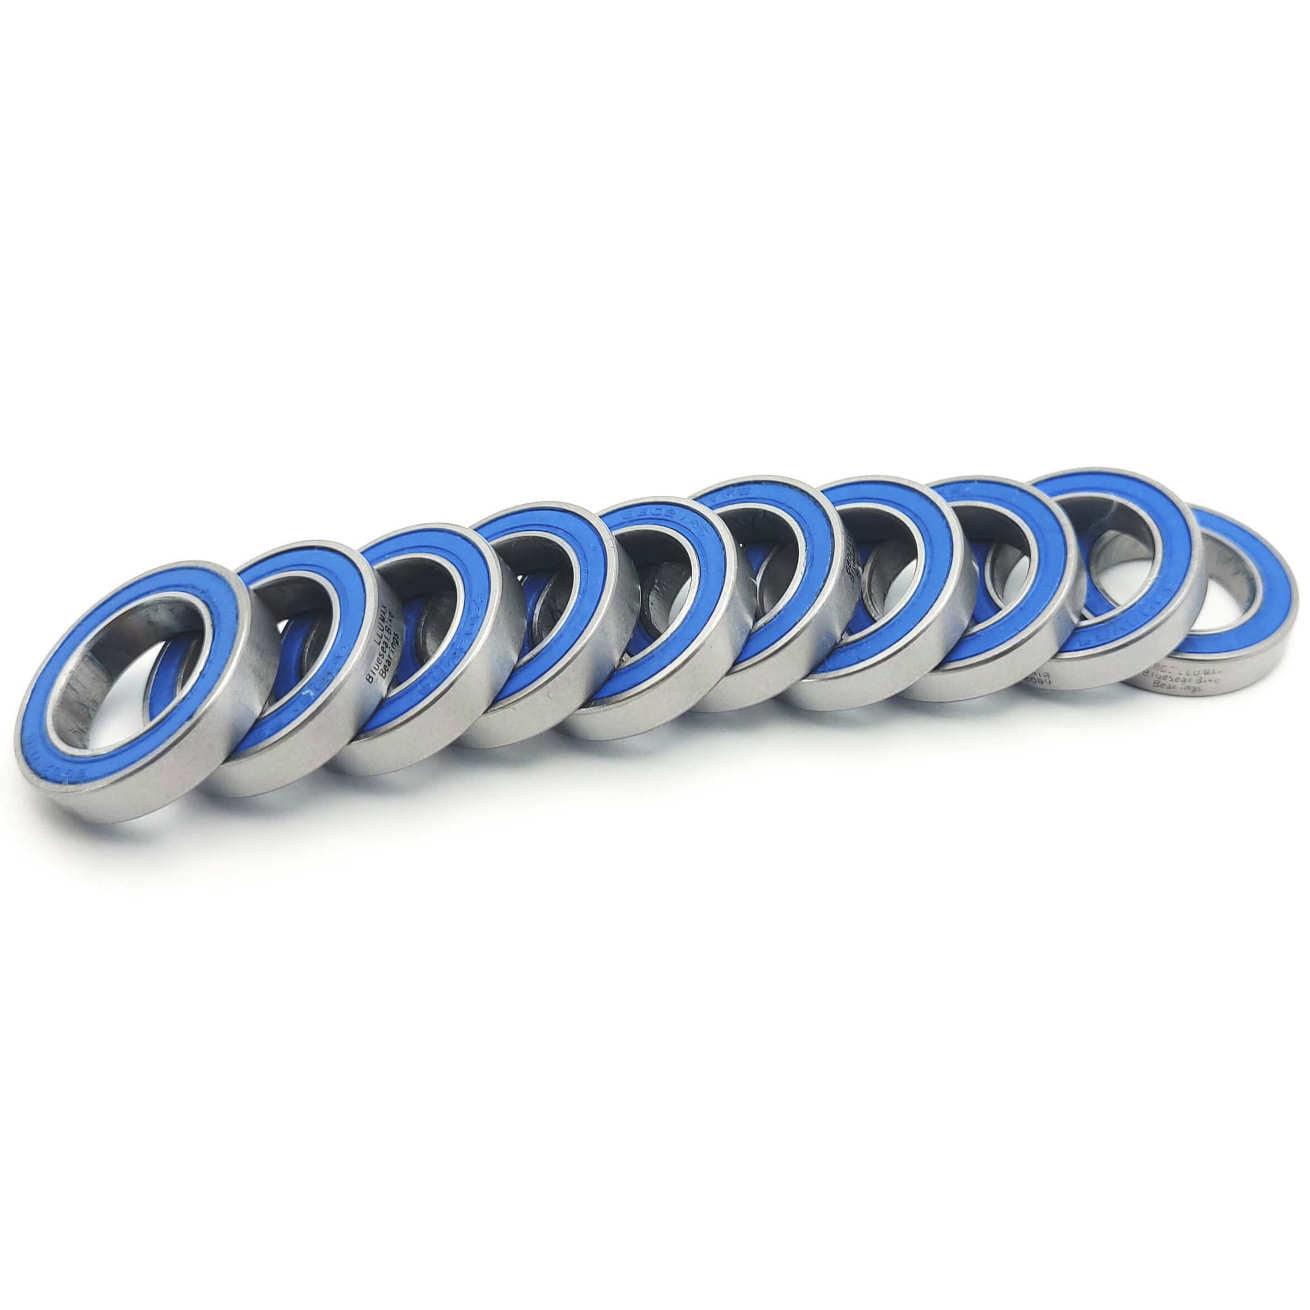 Stumpjumper Pivot Bearing Kit | Blueseal MAX Full Complement - Trailvision - Bicycle Bearing Suppliers